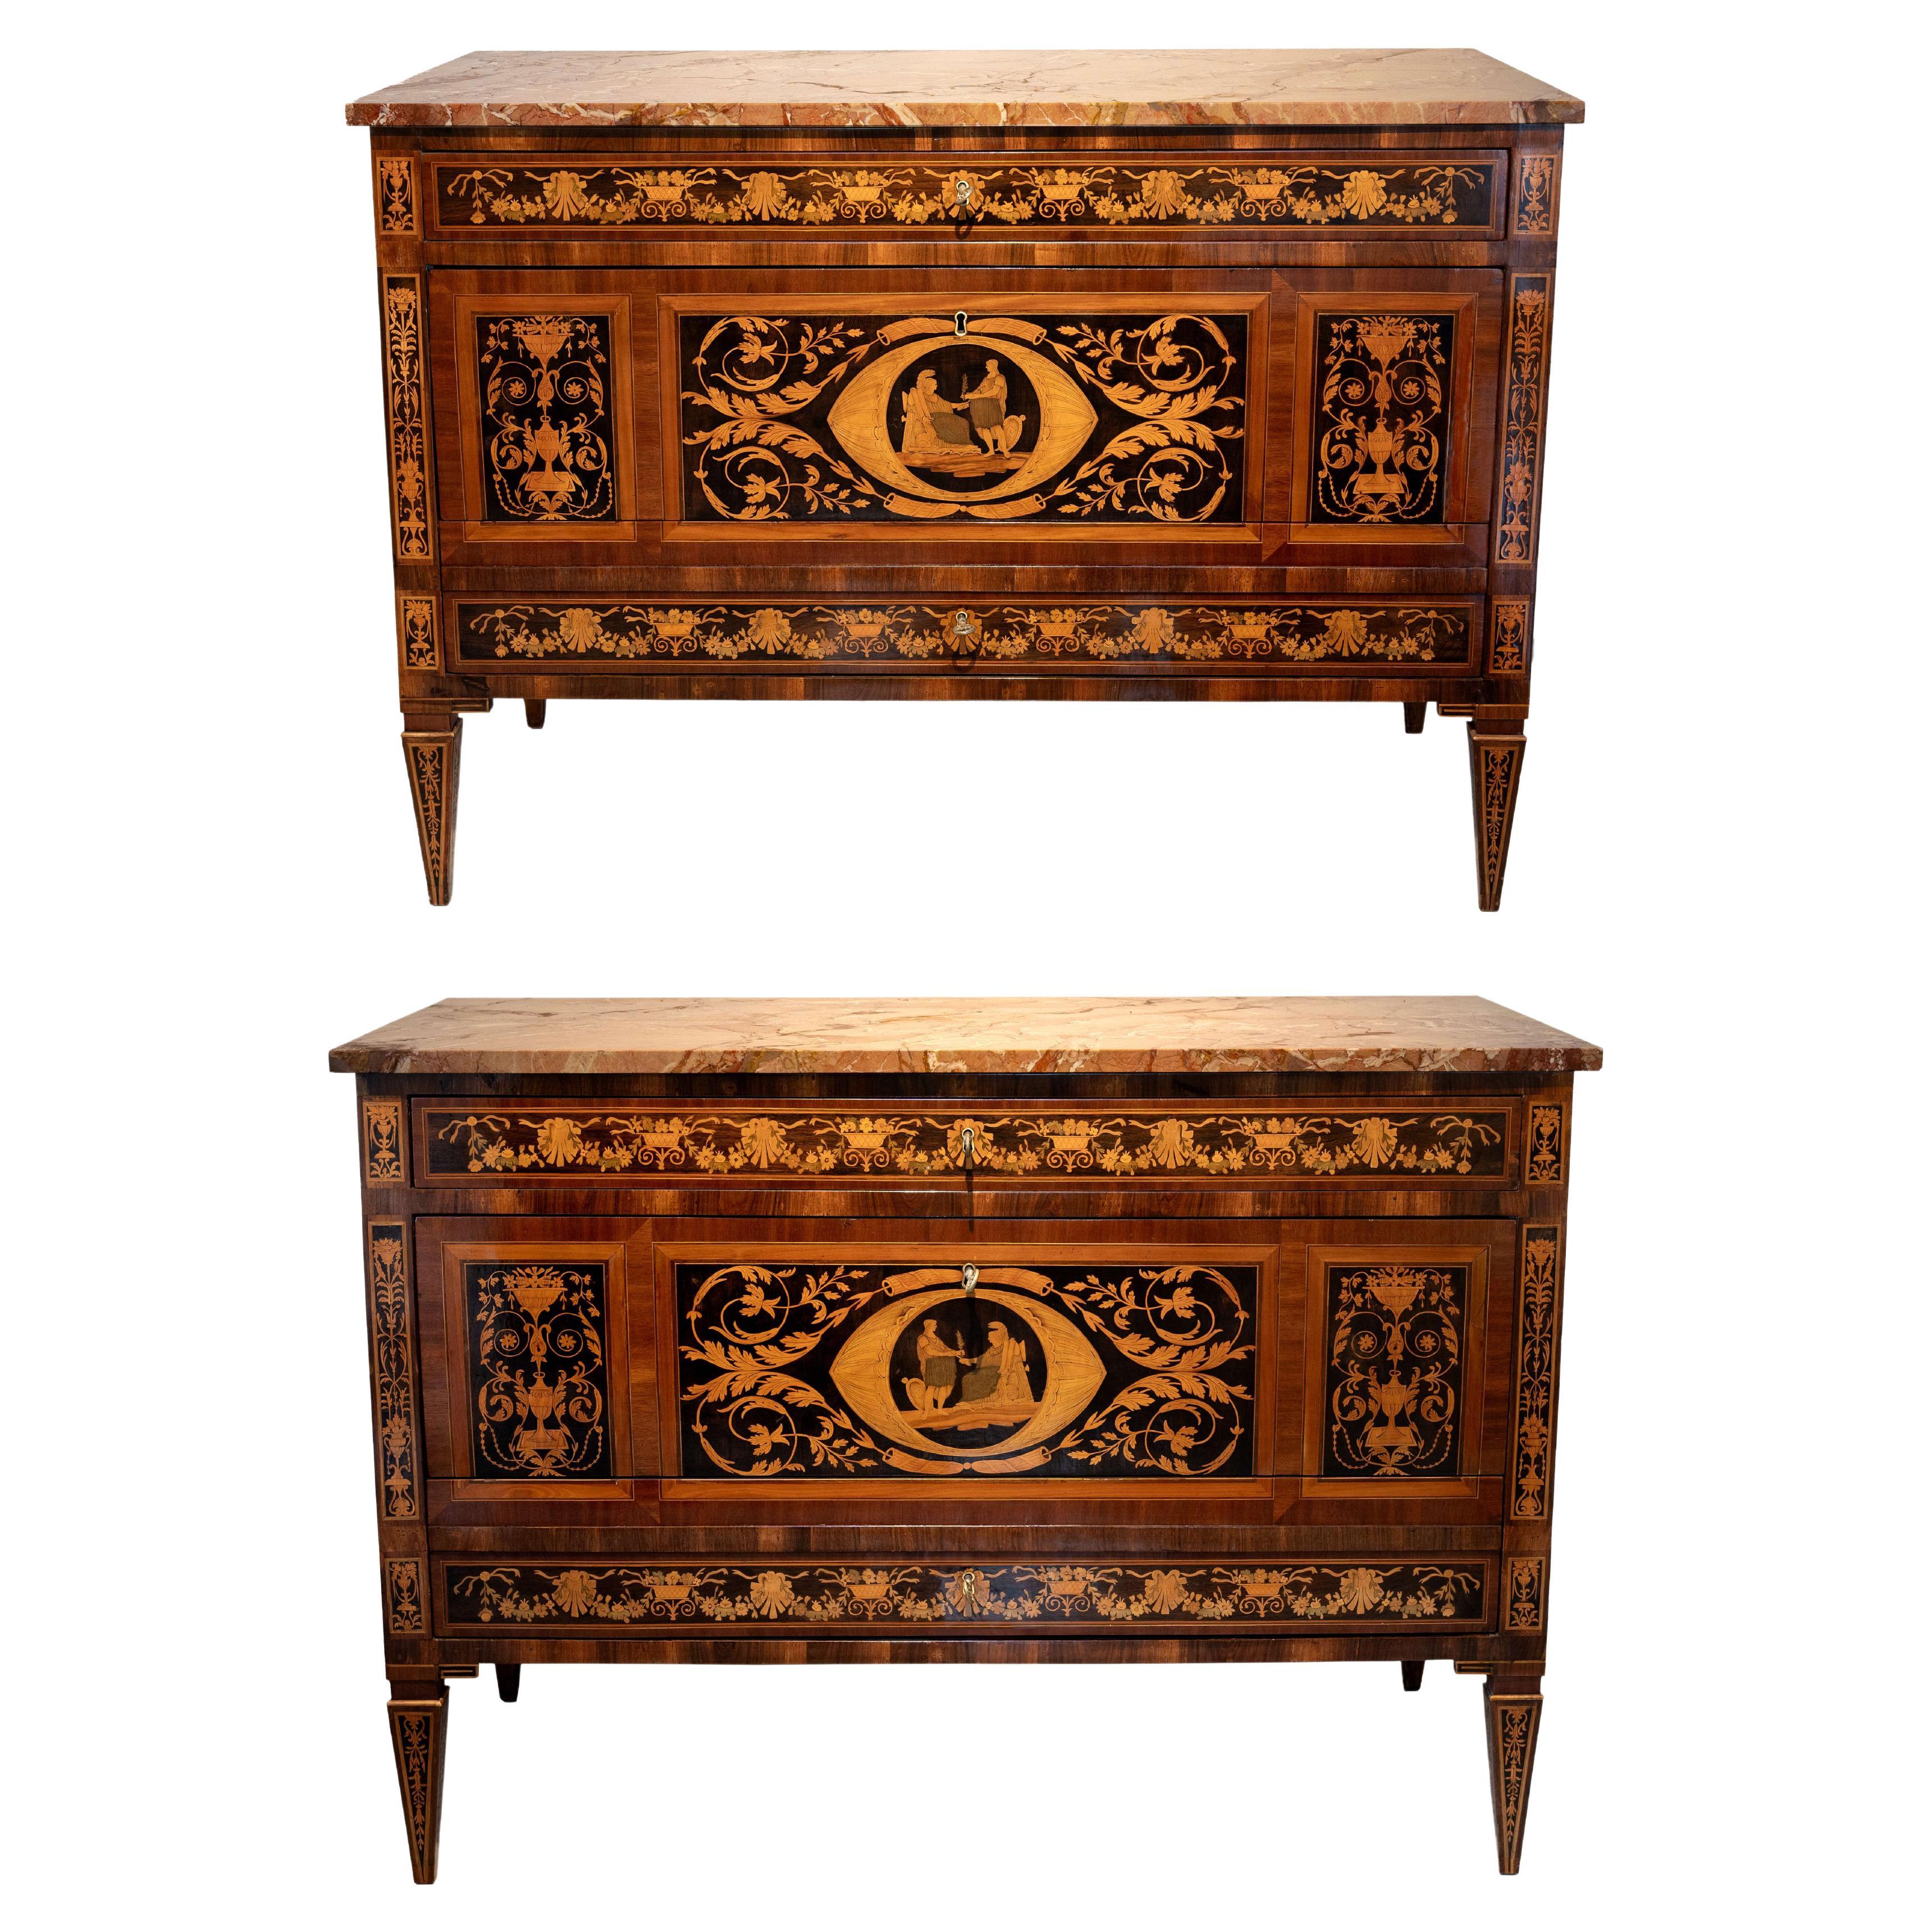 Pair of neoclassical Italian chests of drawers in inlaid wood, XVIII century For Sale